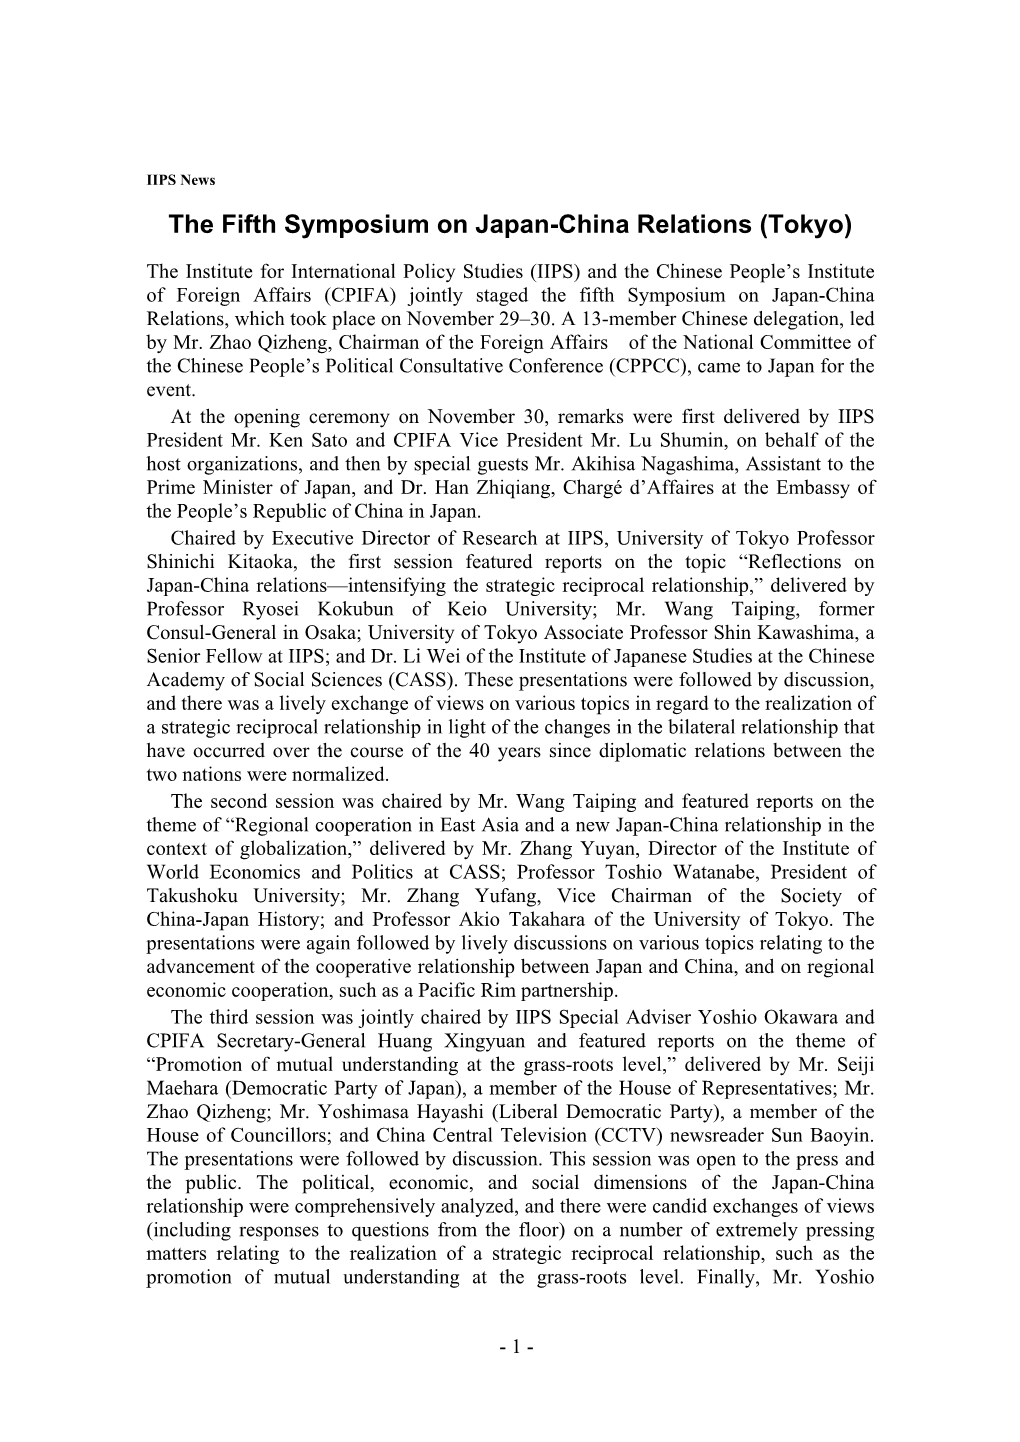 The Fifth Symposium on Japan-China Relations (Tokyo)